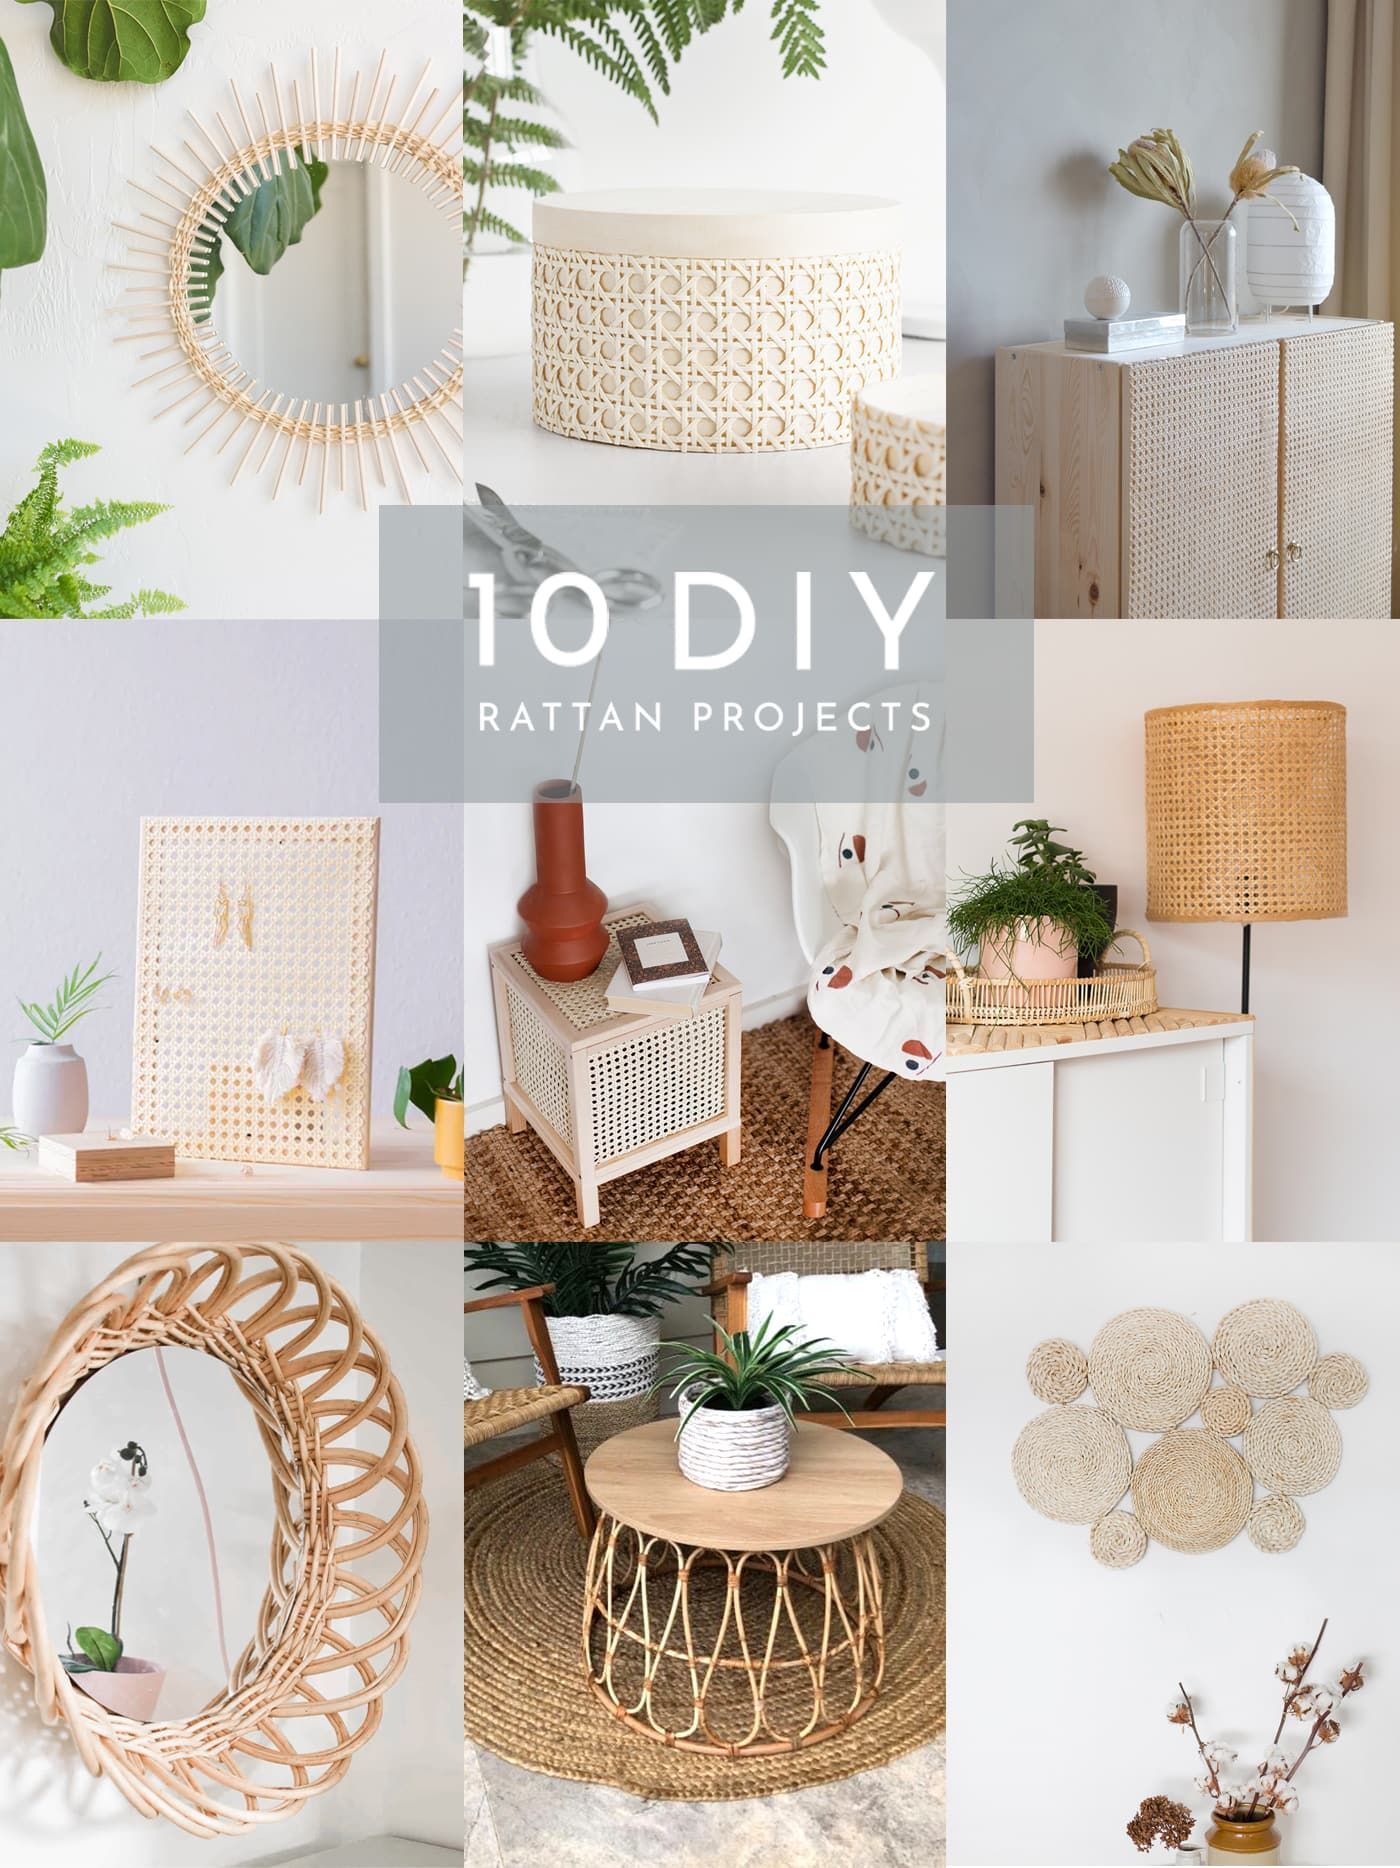 10 DIY Rattan Projects To Try | The Lovely Drawer -   21 diy Decorations maison ideas